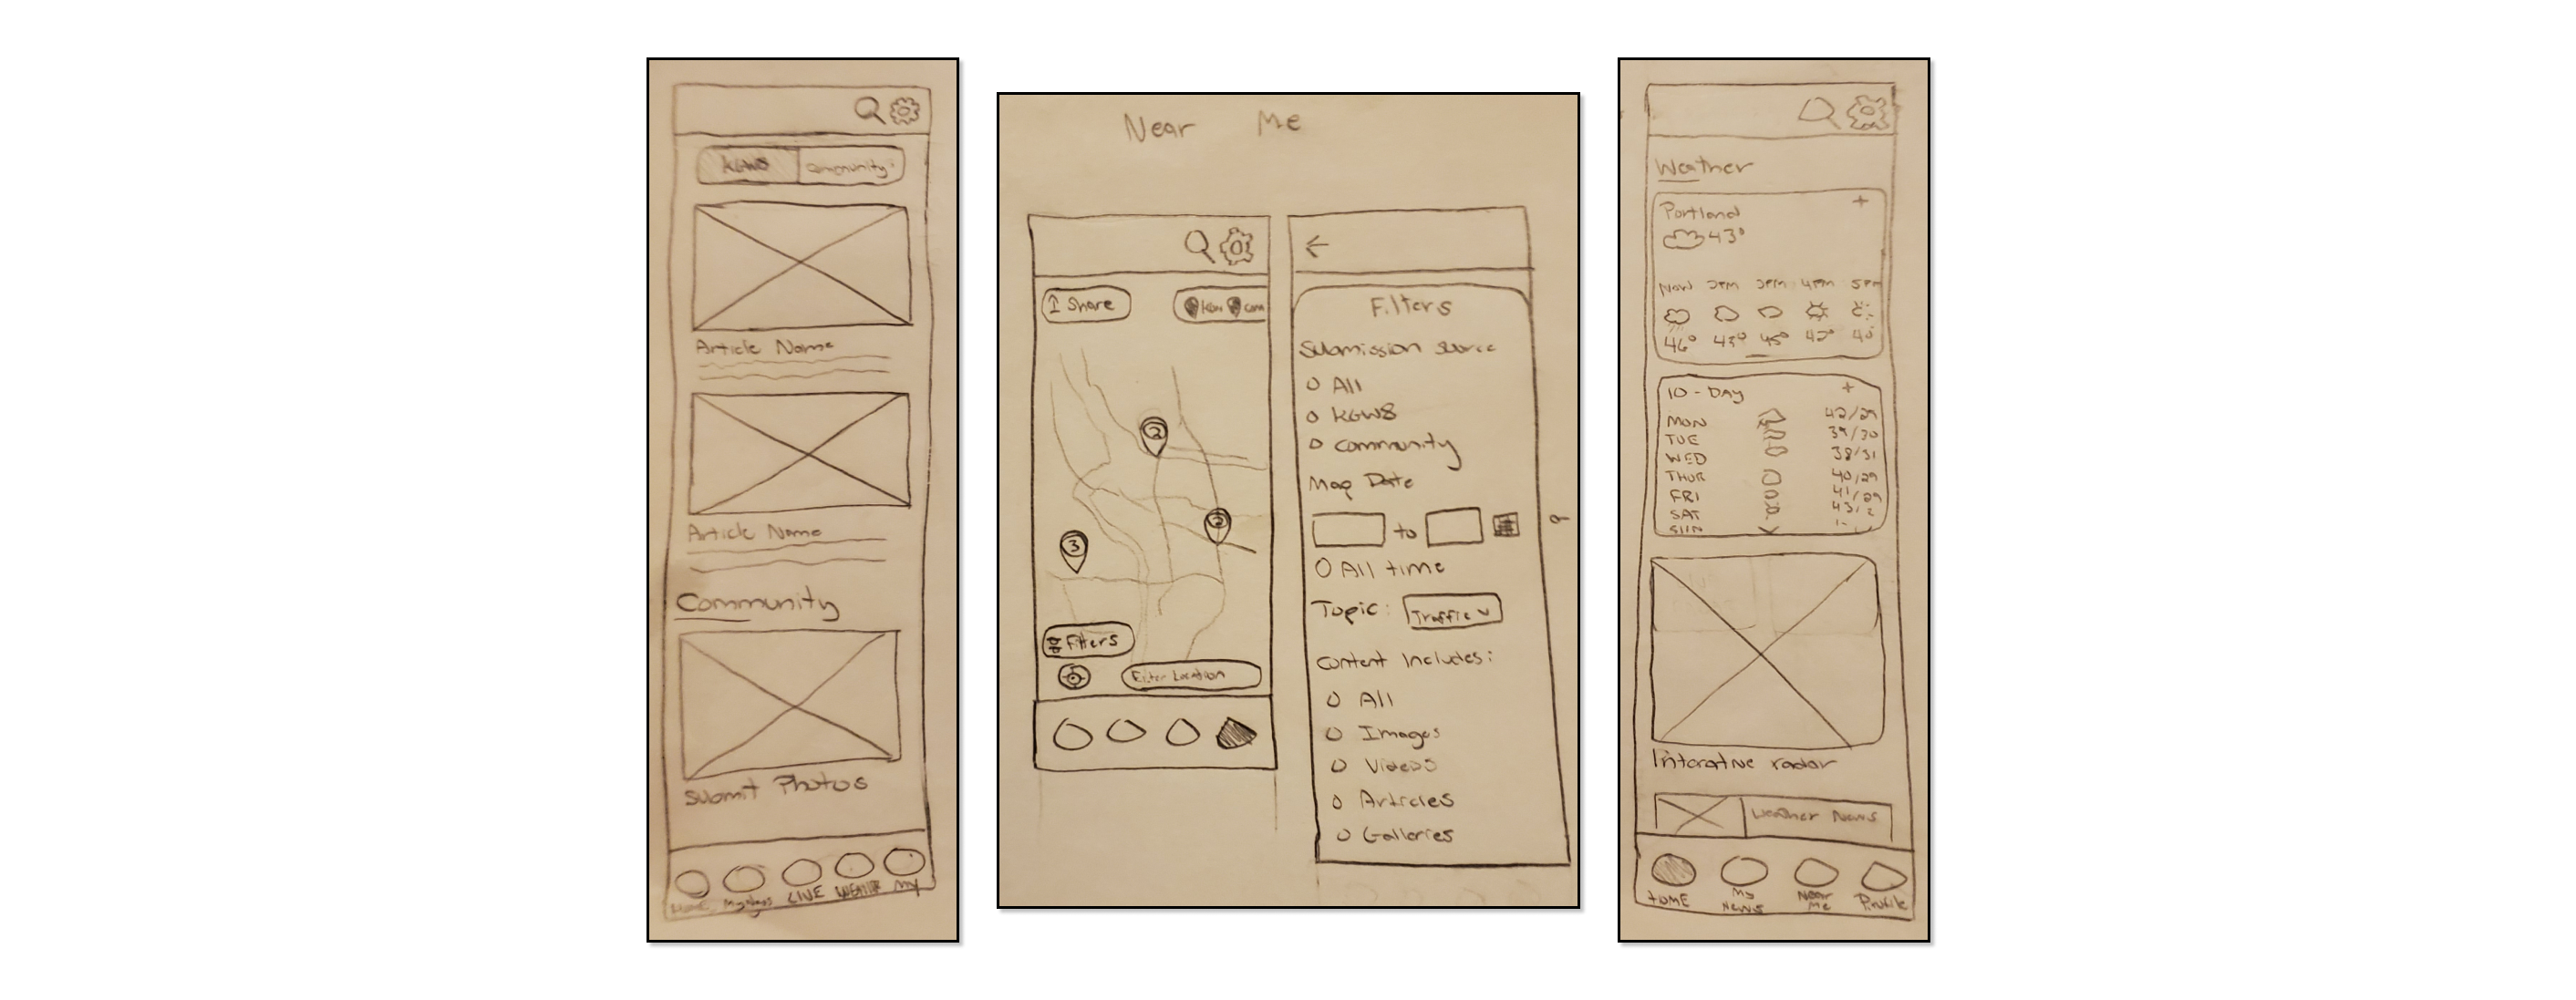 Paper wireframes for the app.